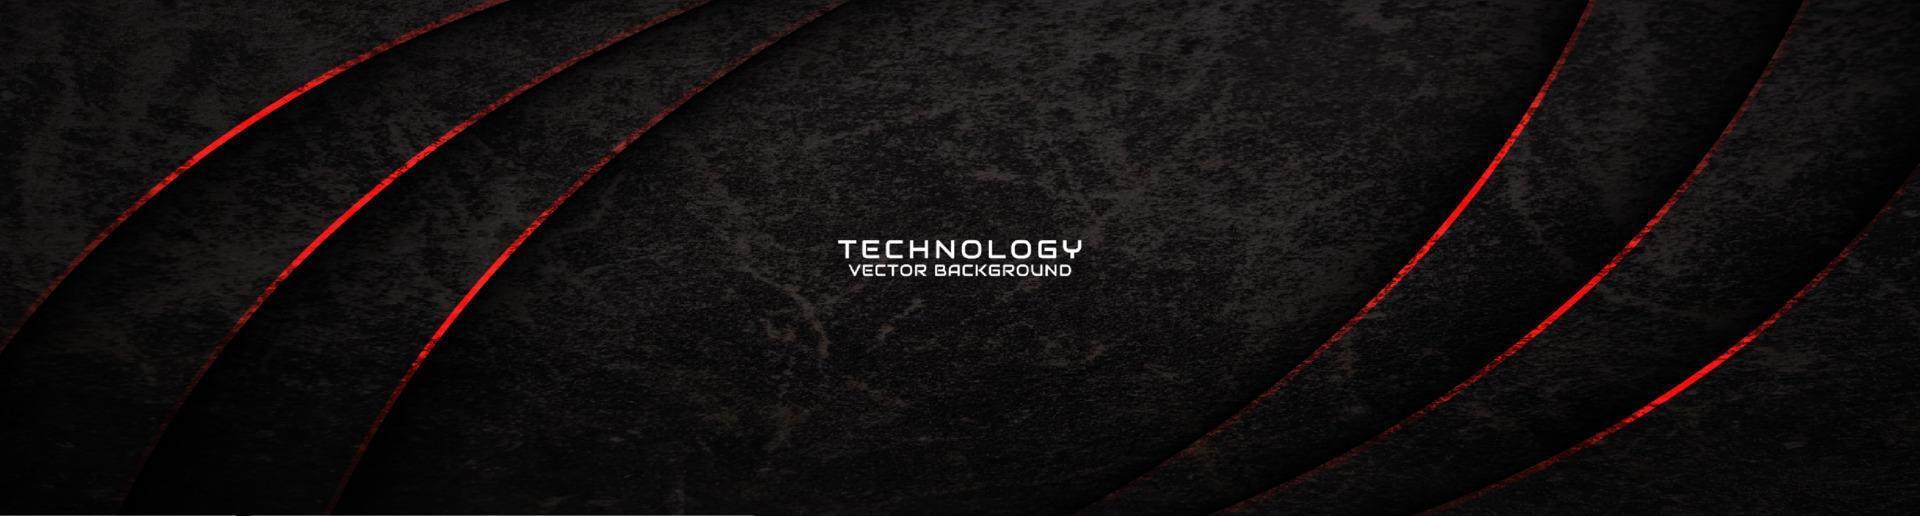 3D black rough grunge techno abstract background overlap layer on dark space with red waves decoration. Modern graphic design element cutout style concept for banner, flyer, card, or brochure cover vector